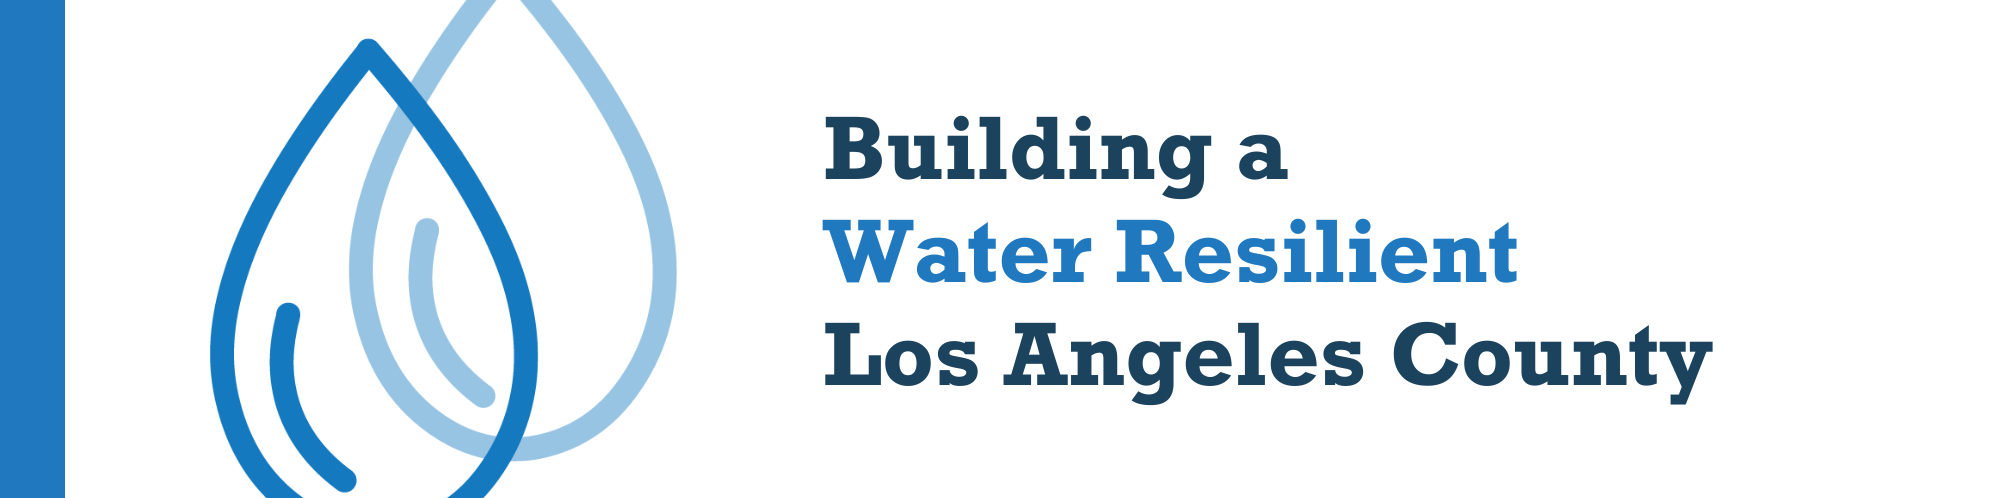 Building A Water Resilient LA County